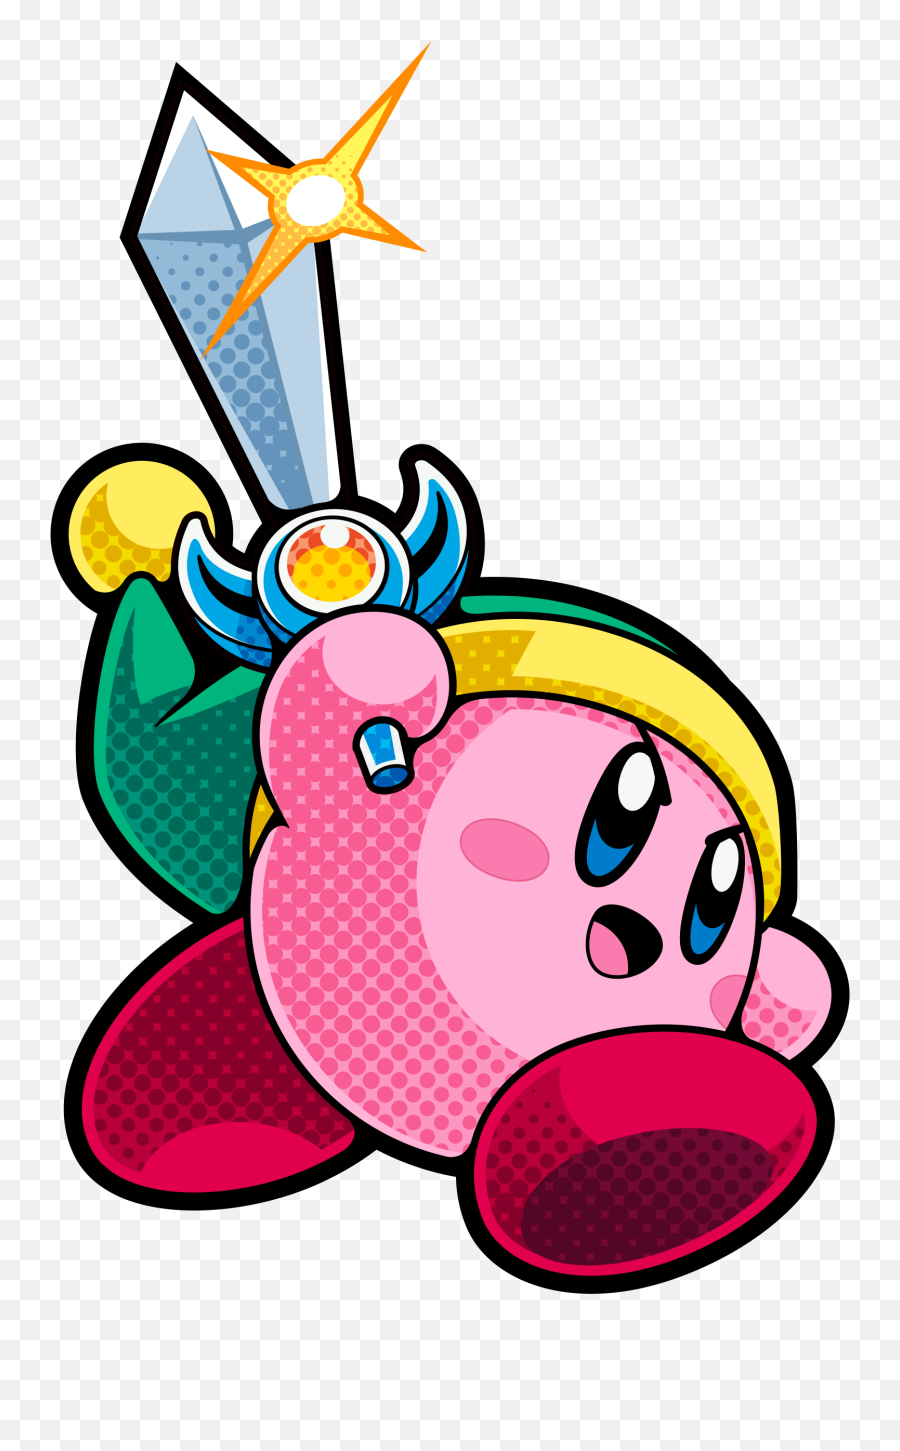 Voting Kirby As Most Popular Video Game - Kirby Battle Royale Kirby Png,Video Game Characters Png